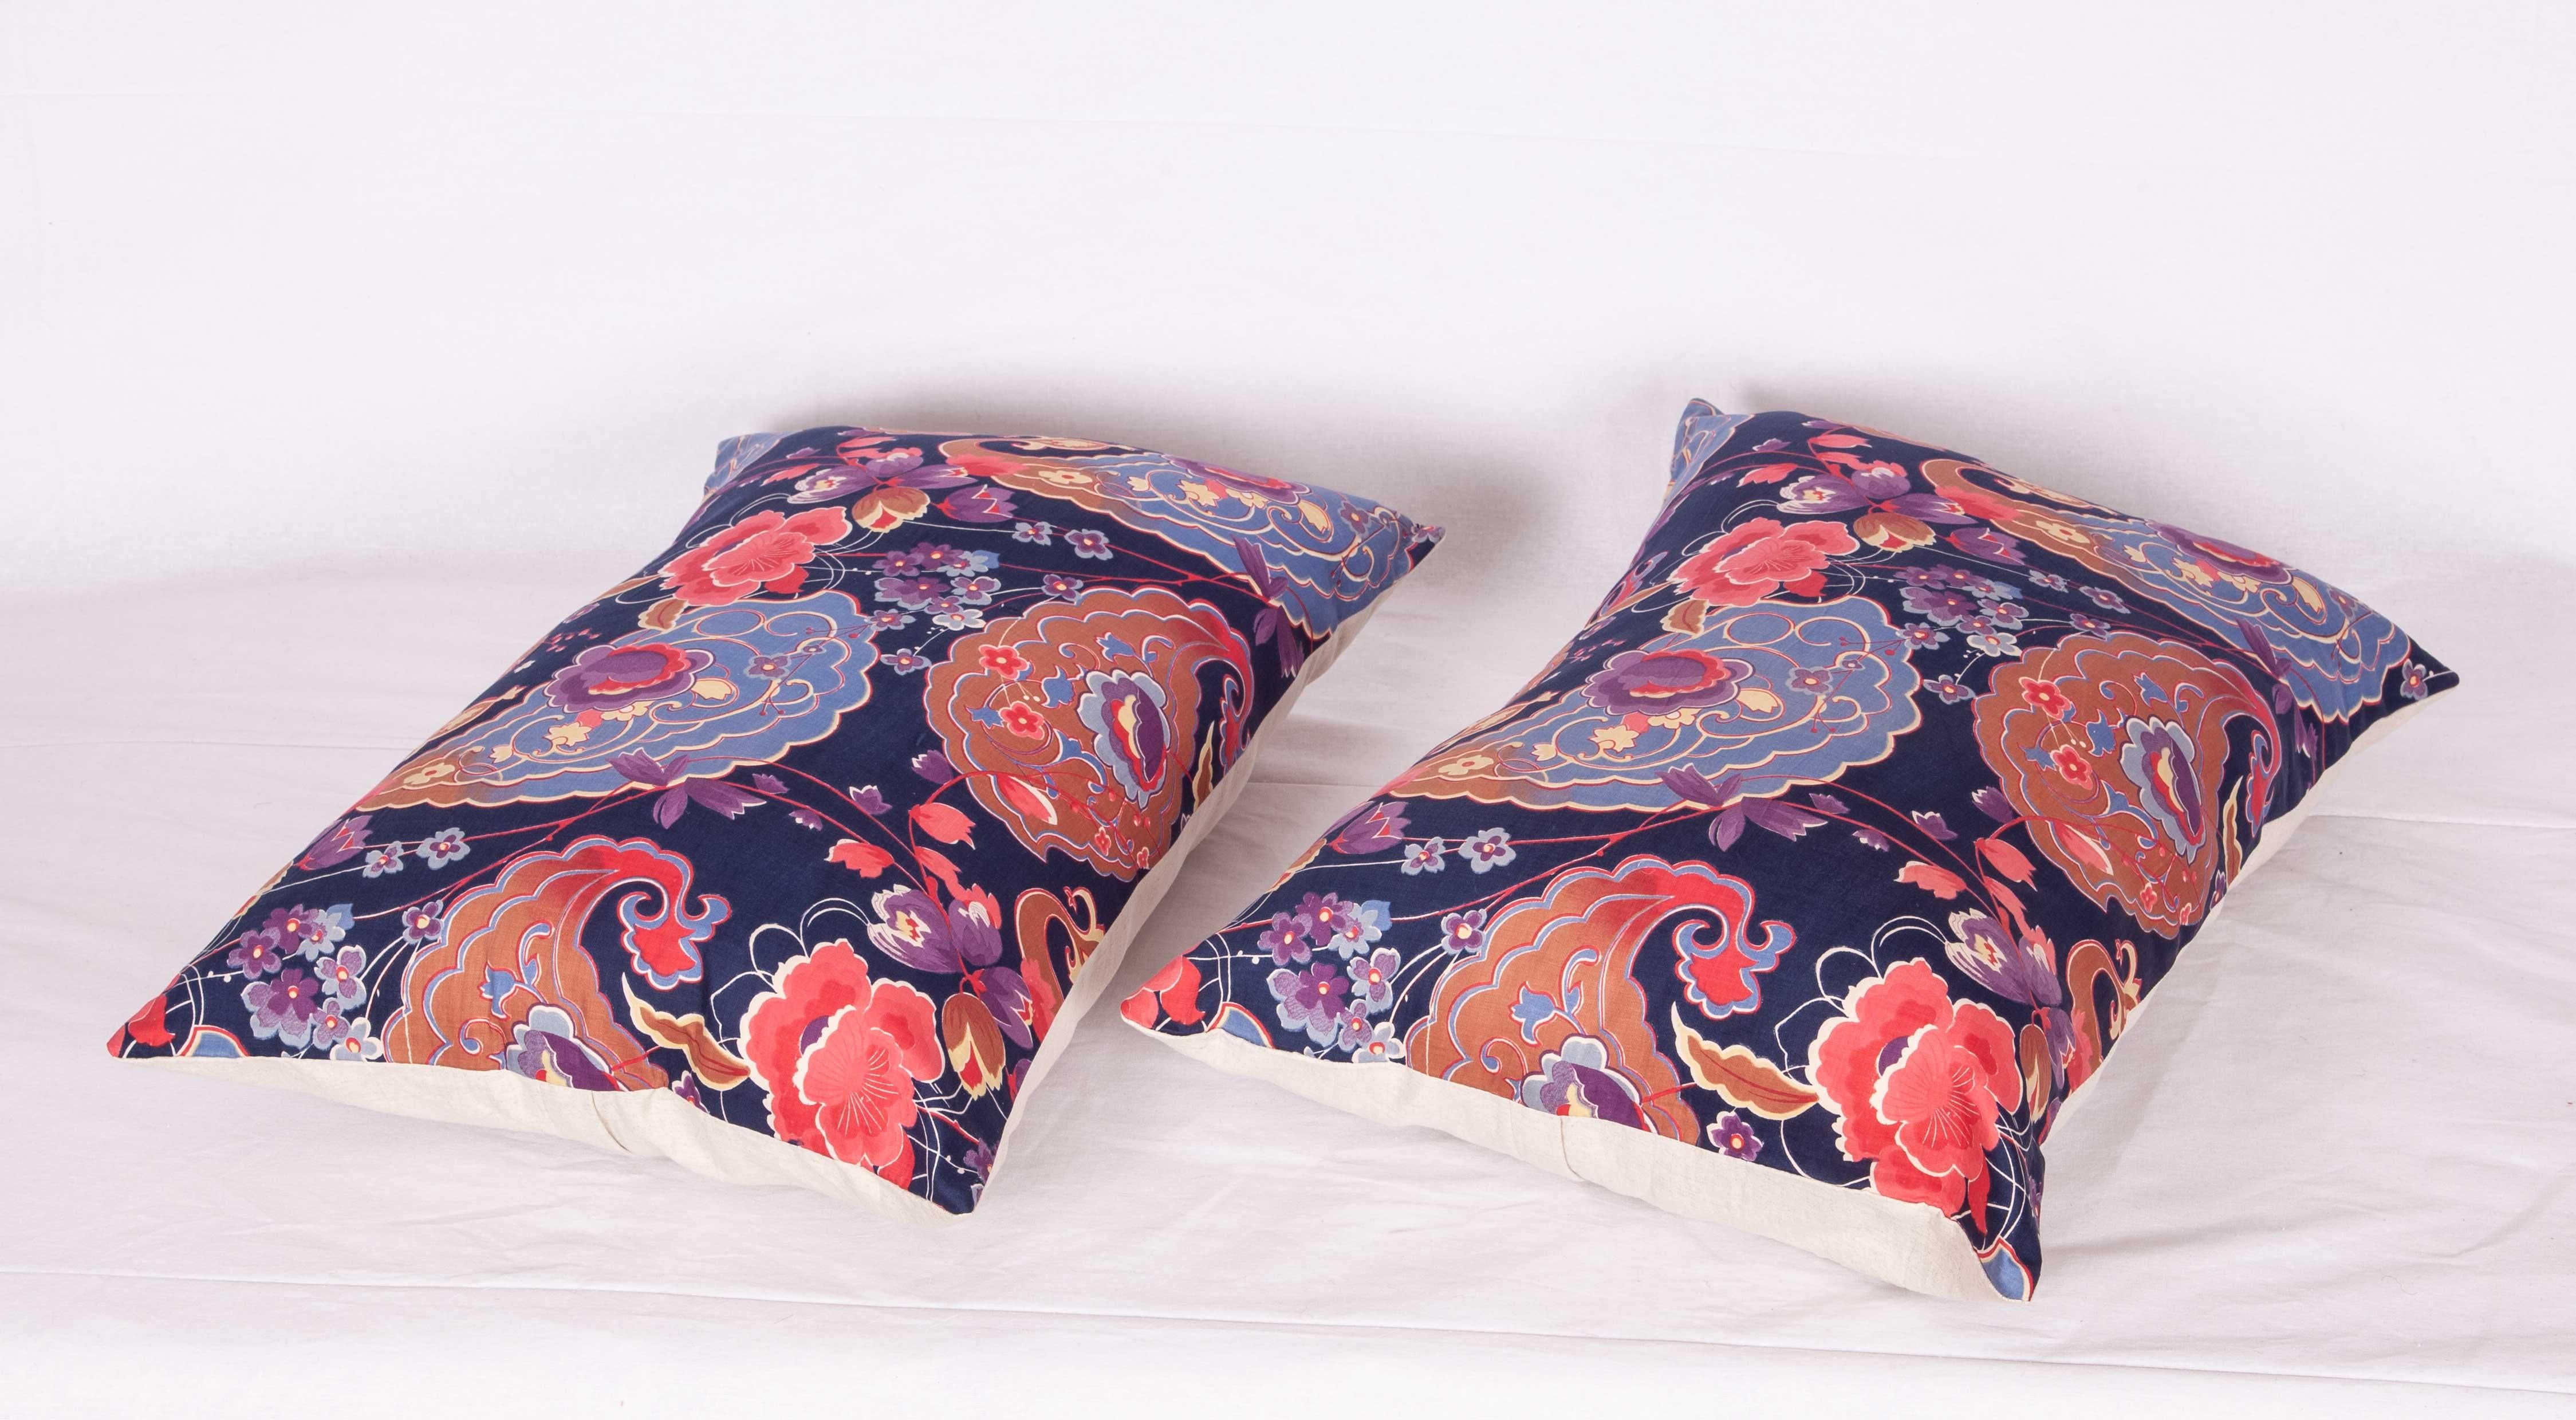 Pillow Cases Fashioned from Mid-20th Century Russian Printed Cotton 2